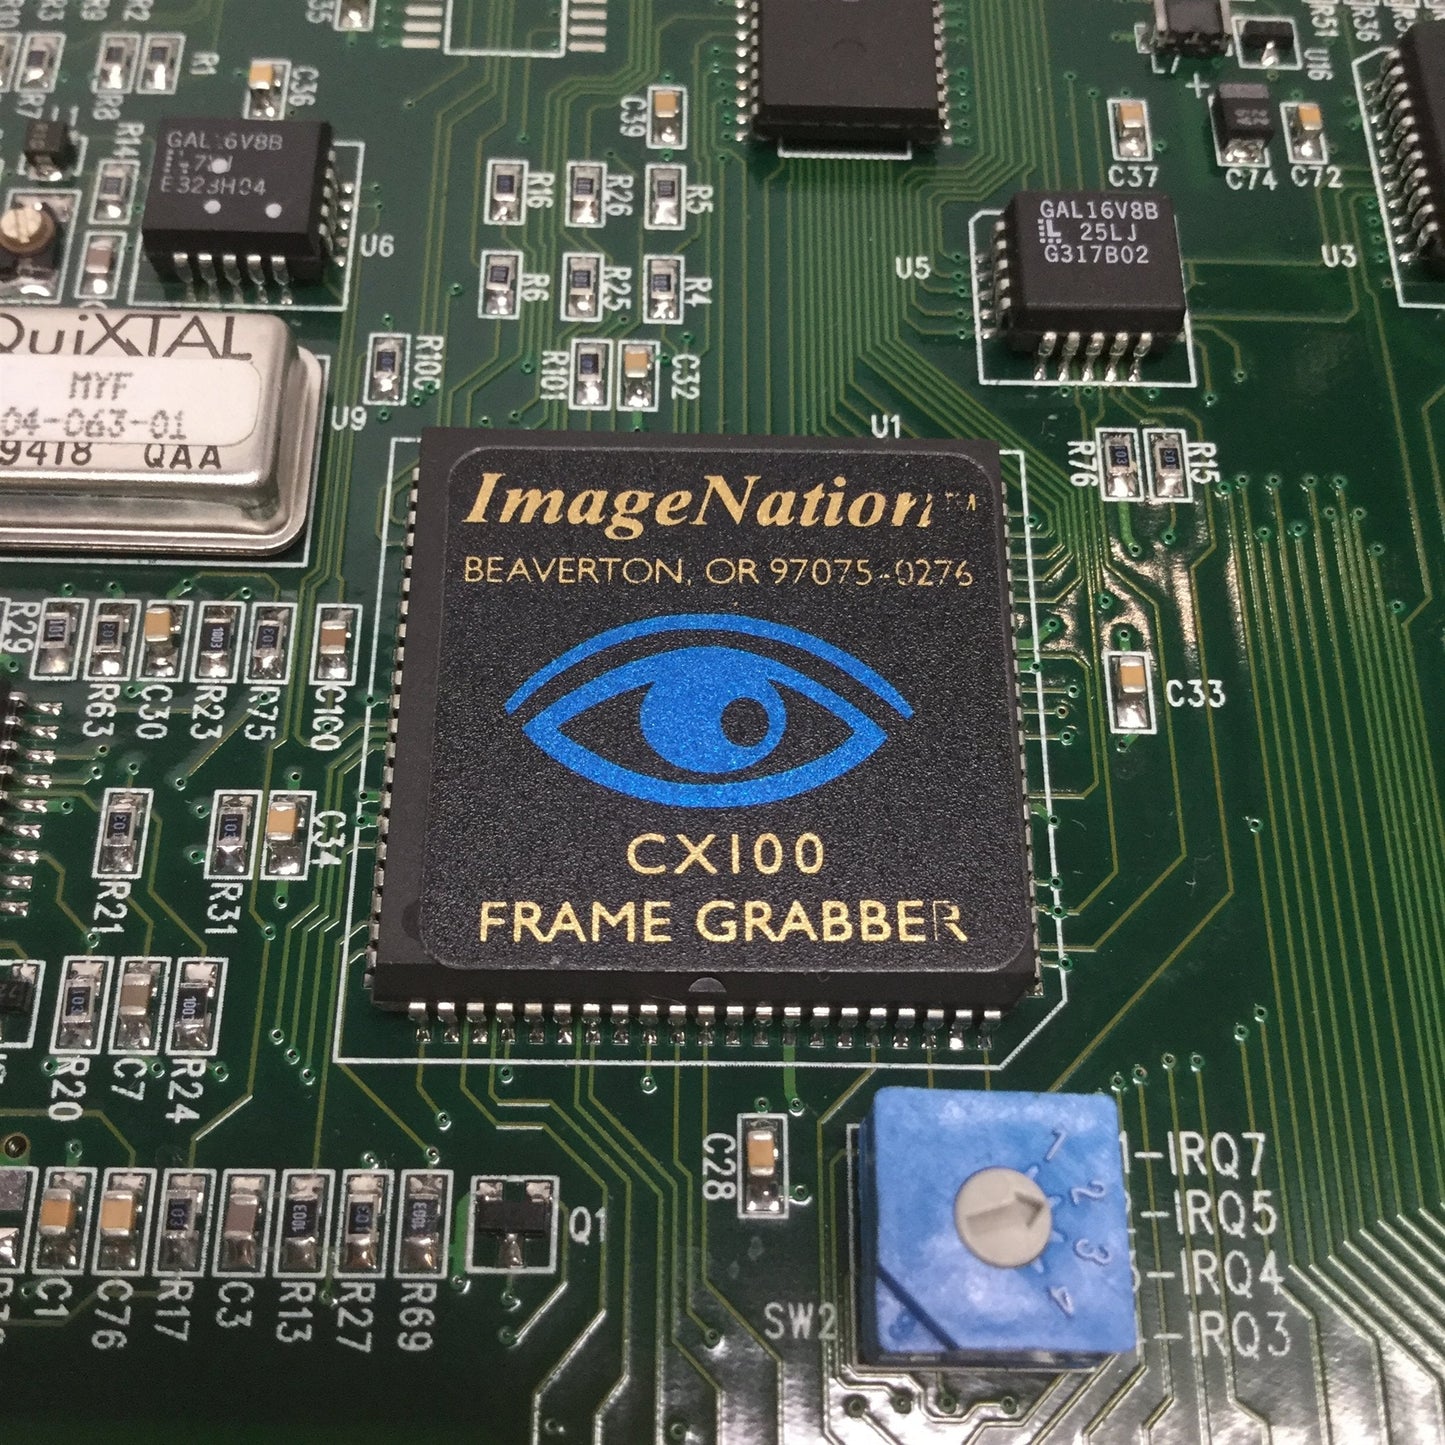 Used ImageNation CX100-10 Precision Video Frame Grabber Capture Card ISA Interface